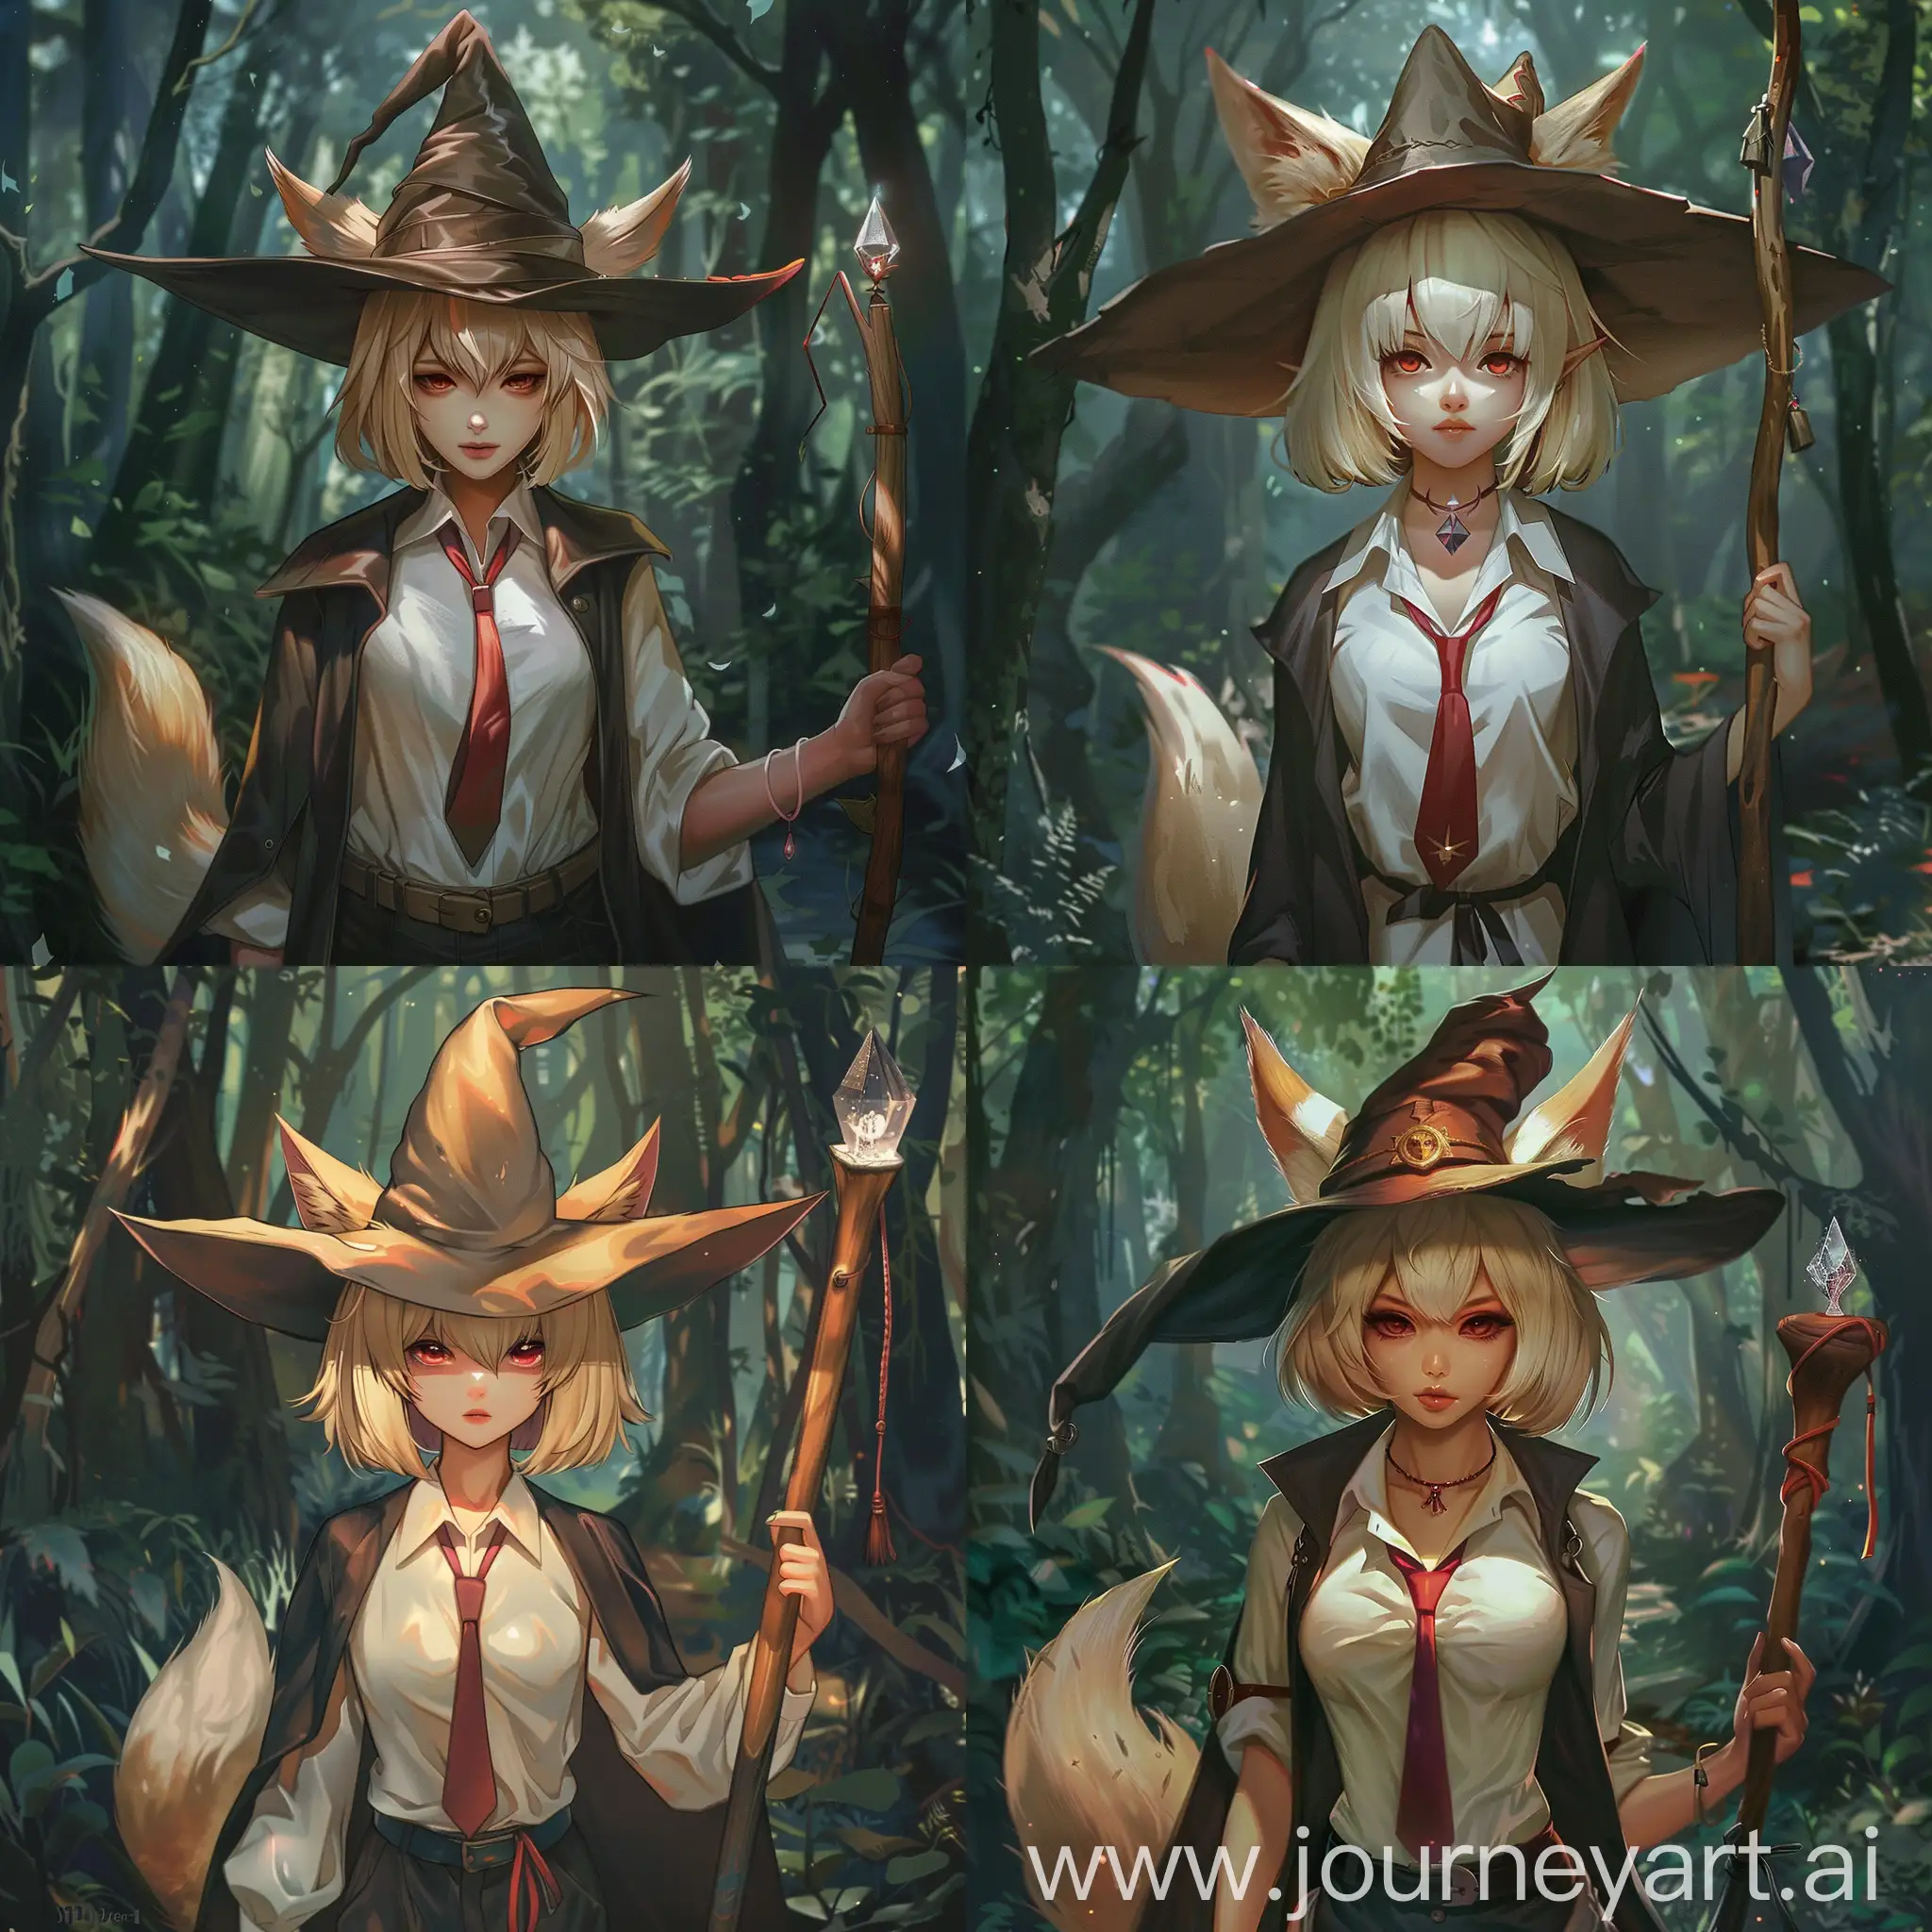 Kitsune has blonde short hair that is shoulder length, she has straight bangs, her bangs is parted in the center, this type of bangs is also called curtain bangs. she has two fox tails the same color as her hair. She is wearing a white shirt, a red tie and a black robe. Her eye color ranges from red to green, and her skin is slightly pale. On her head is a large wizard's hat, and her fox ears can be seen sticking out through the holes in the hat. The background is a dark and dense forest. She walks through this forest. In his right hand he holds a wooden staff with a crystal on top. Fantasy anime style